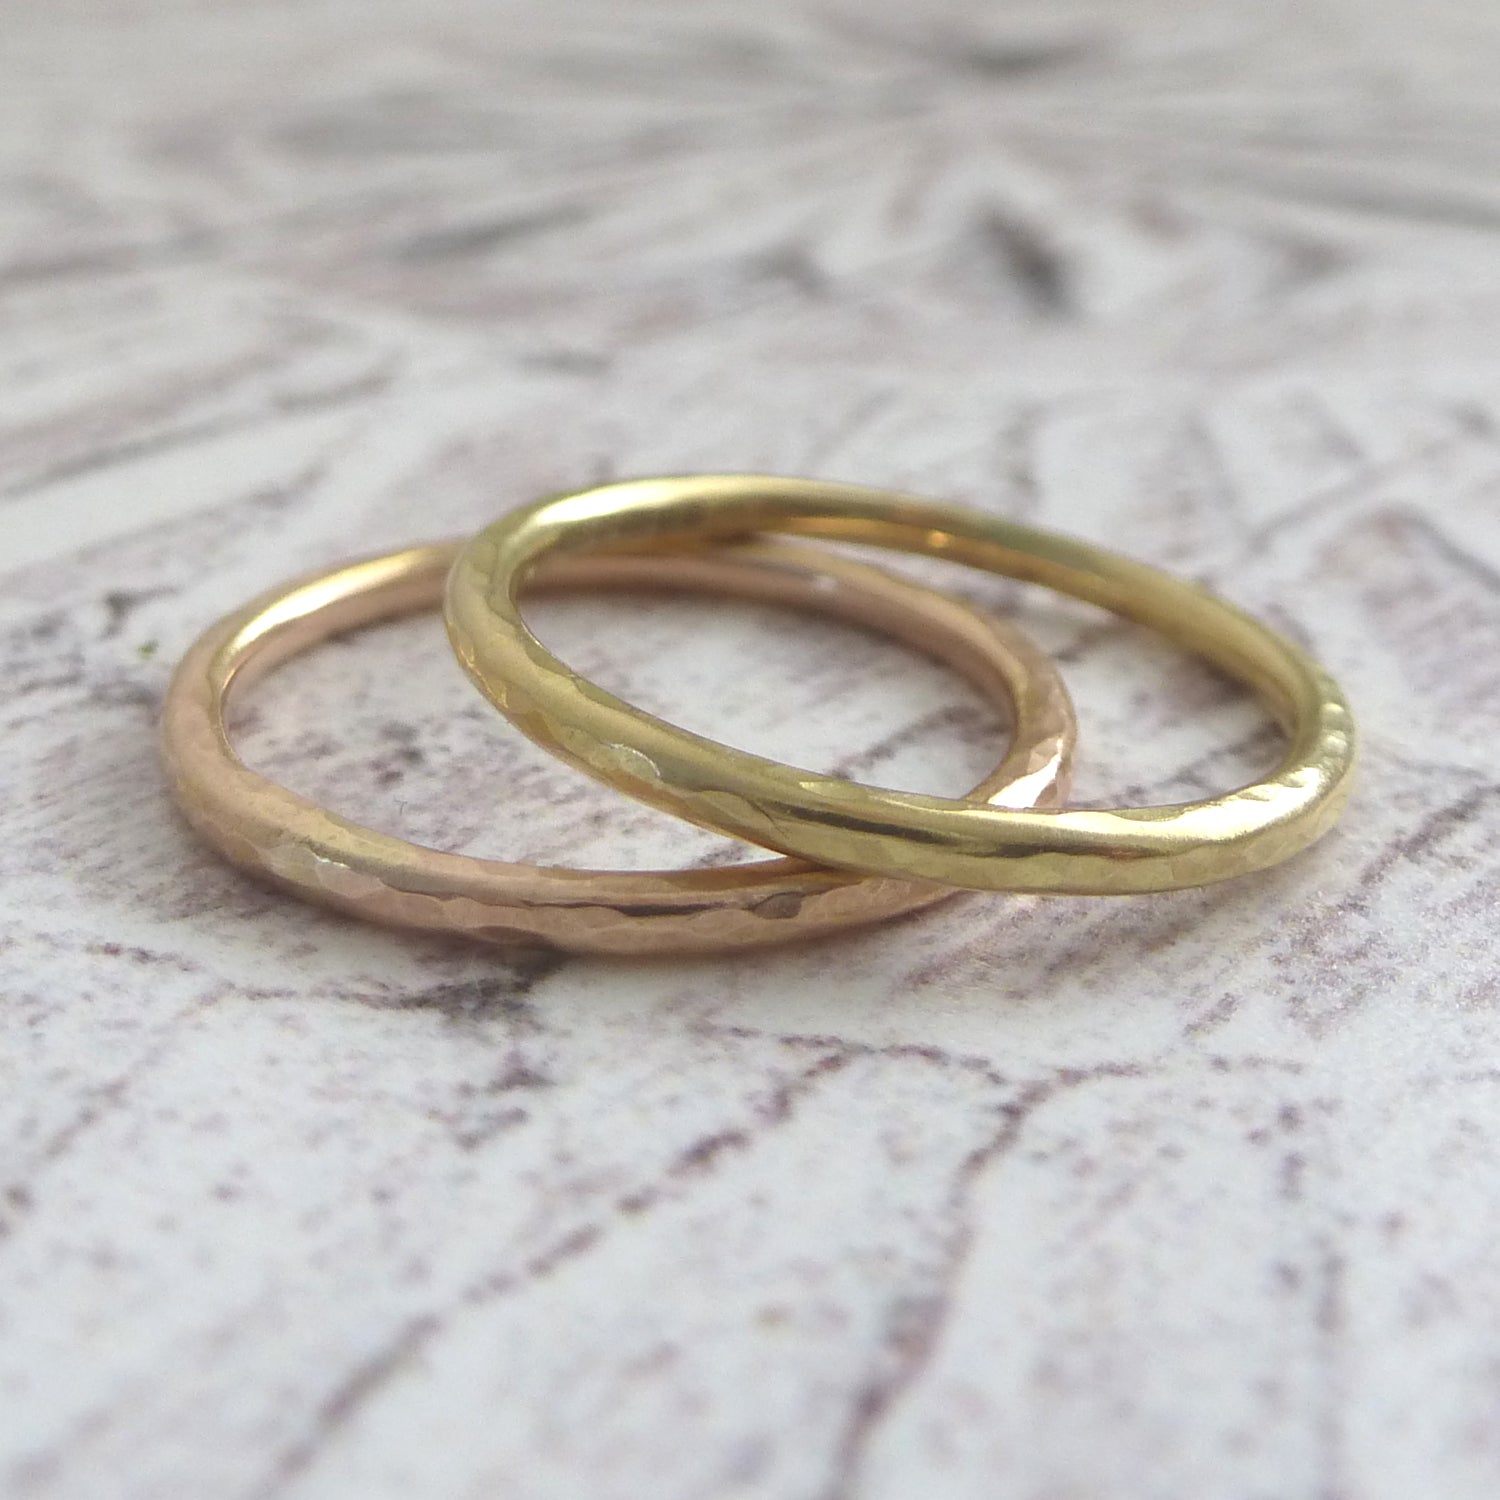 A pair of 18ct yellow gold slim band, one yellow one rose, both with hammered finish. Close up sitting on a board.